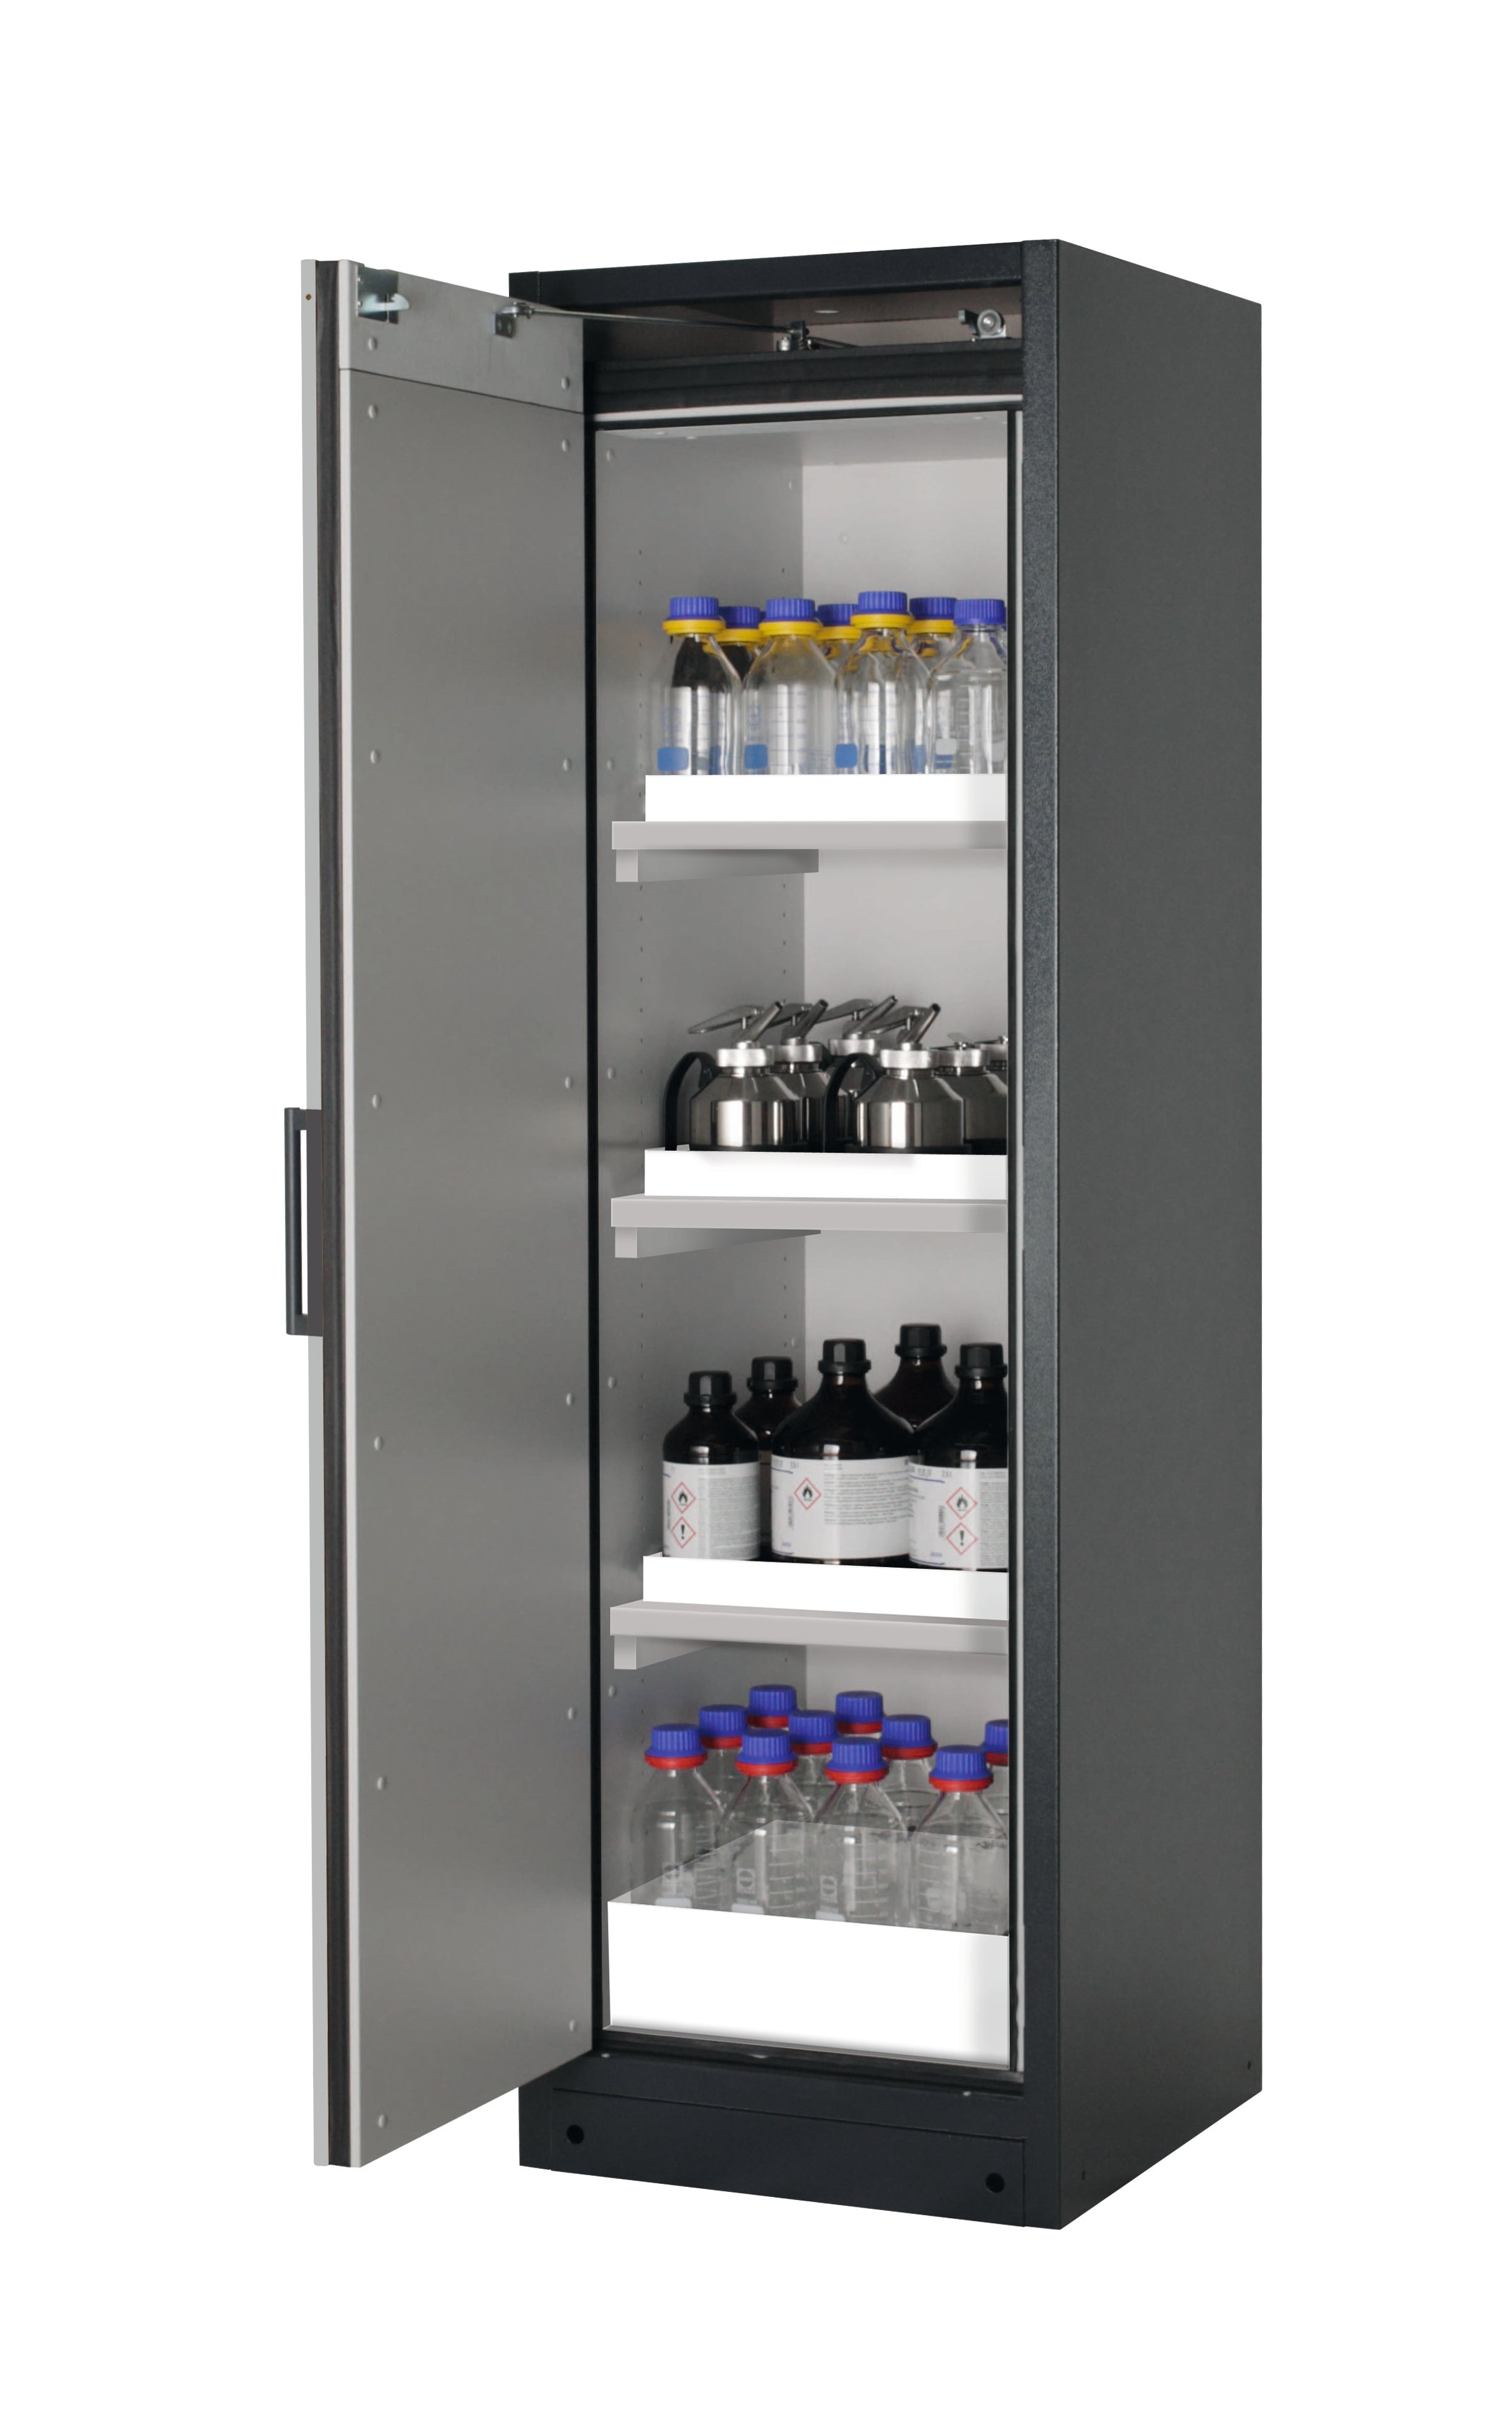 Type 90 safety storage cabinet Q-CLASSIC-90 model Q90.195.060 in pure white RAL 9010 with 3x tray shelf (standard) (polypropylene),